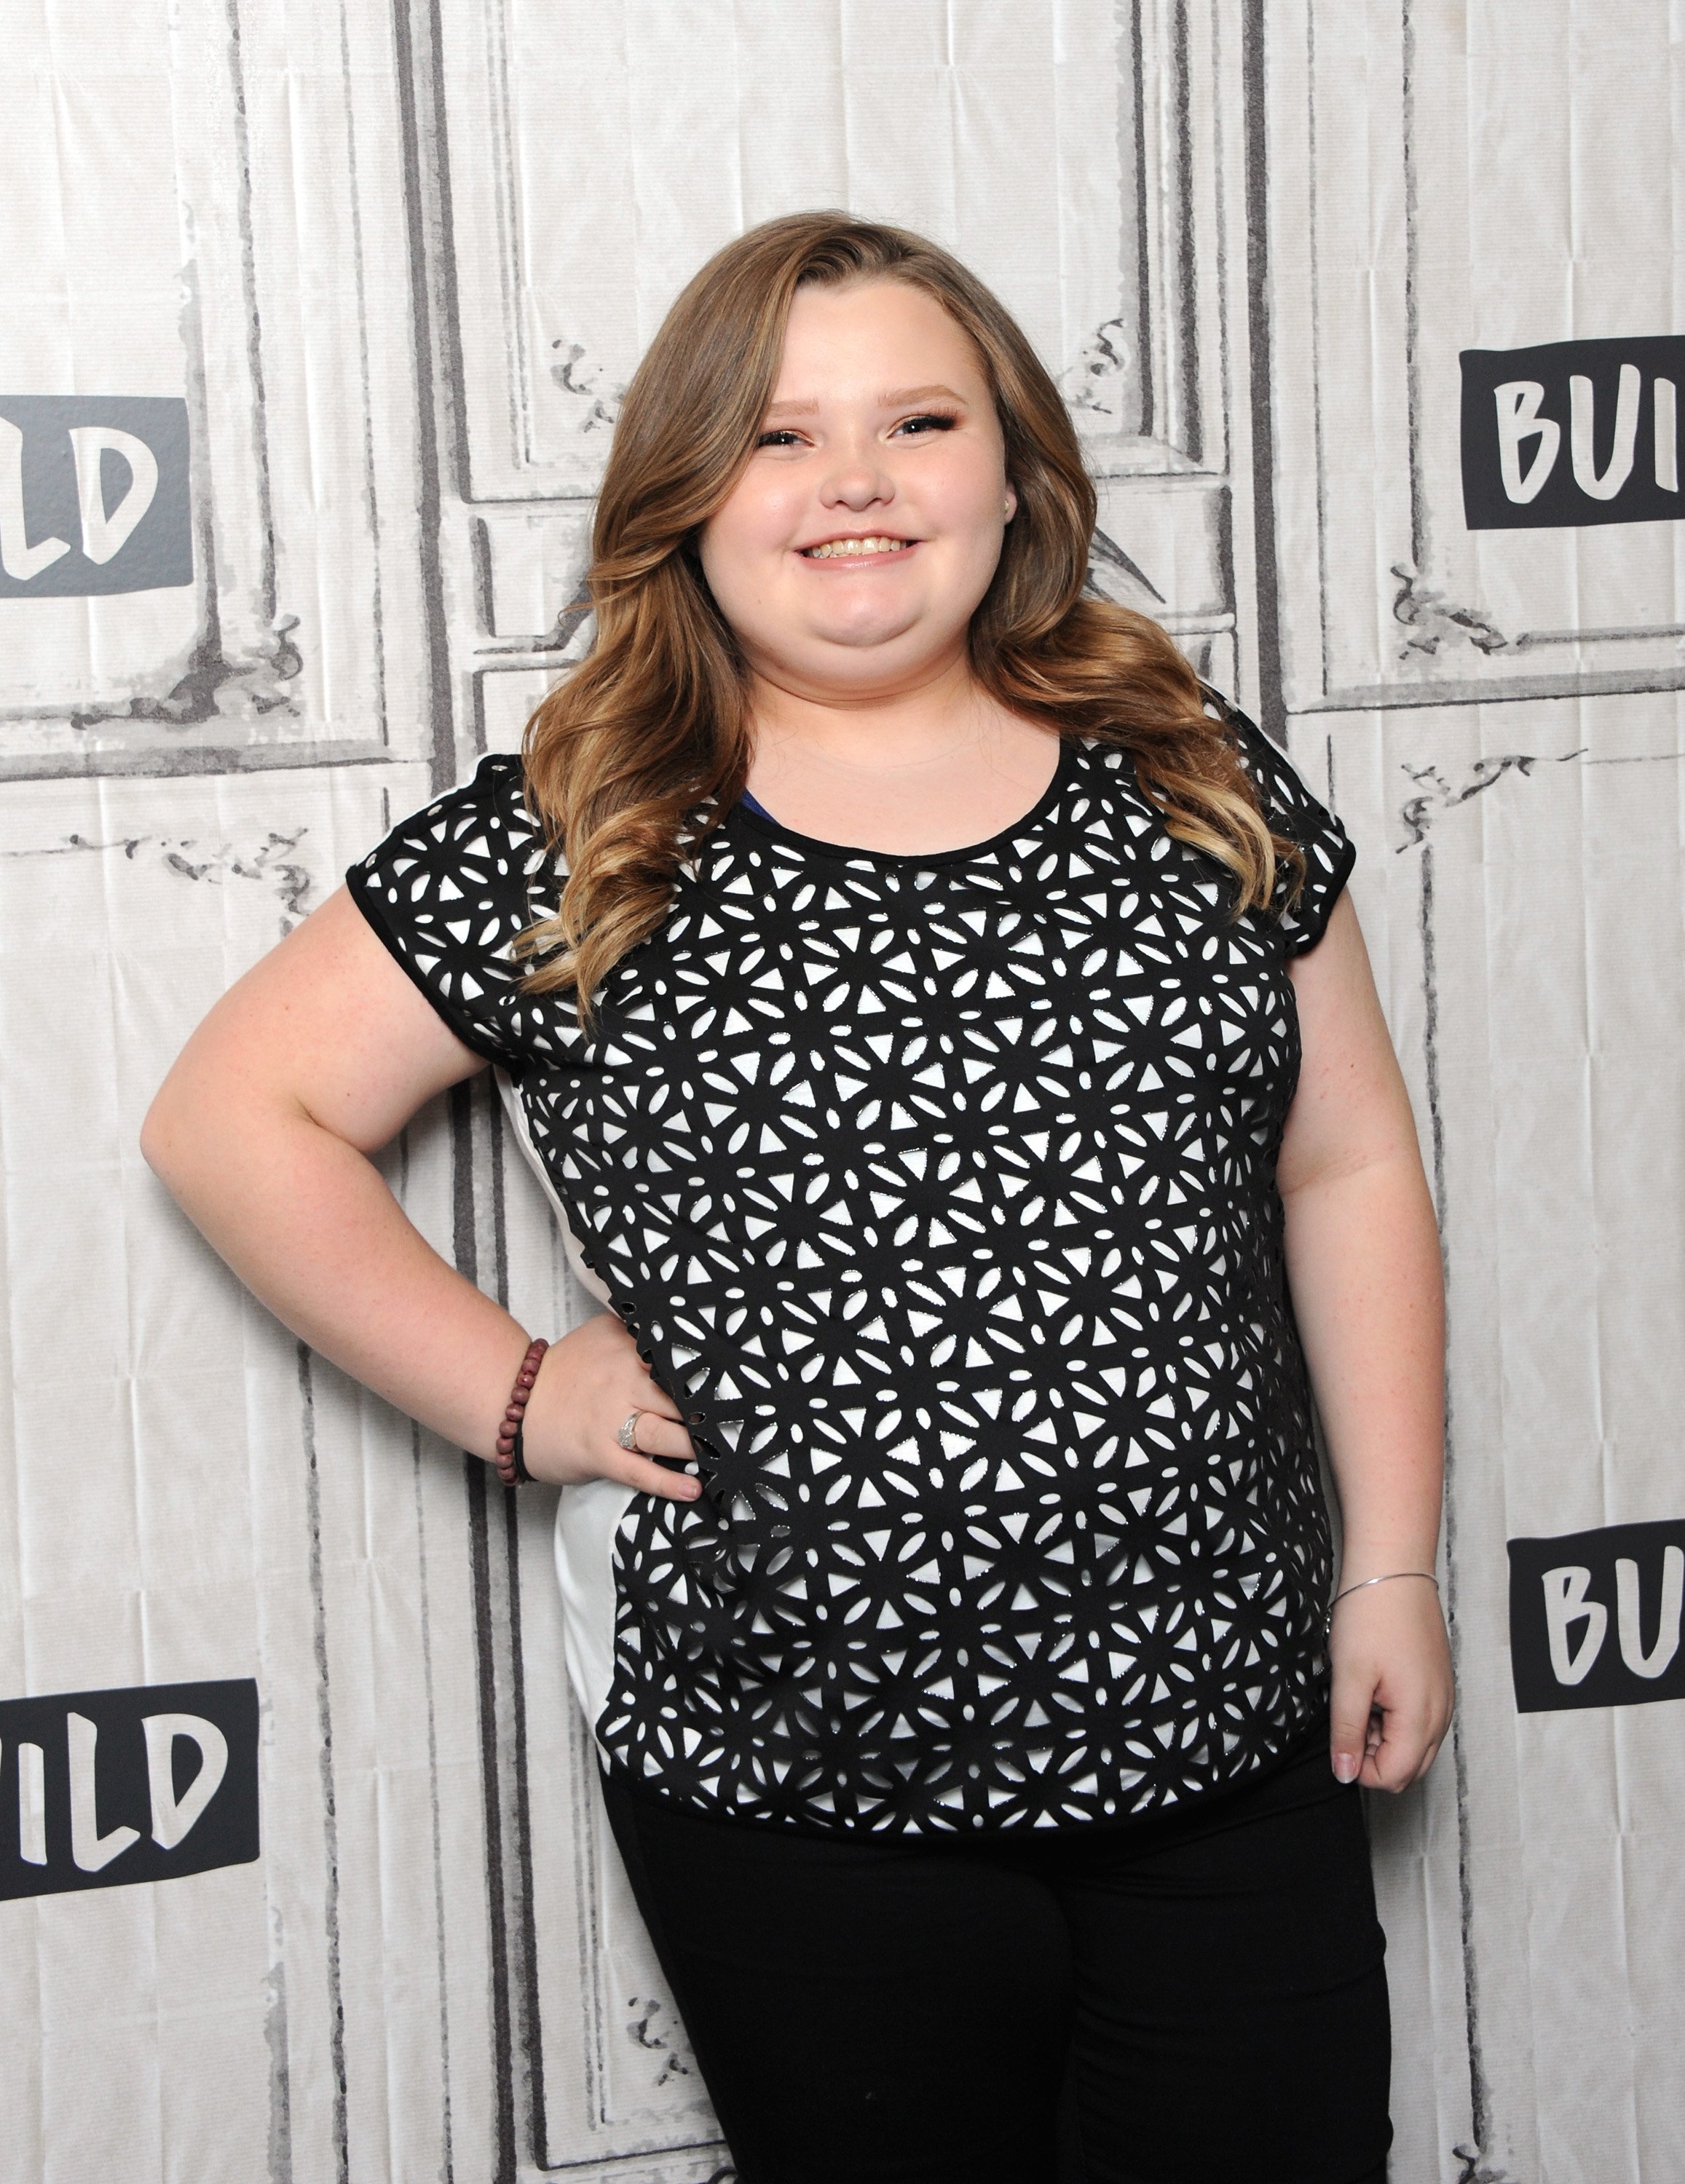 Honey Boo Boo visits Build Series to discuss 'Mama June: From Not to Hot' at Build Studio on June 11, 2018 in New York City | Photo: Getty Images